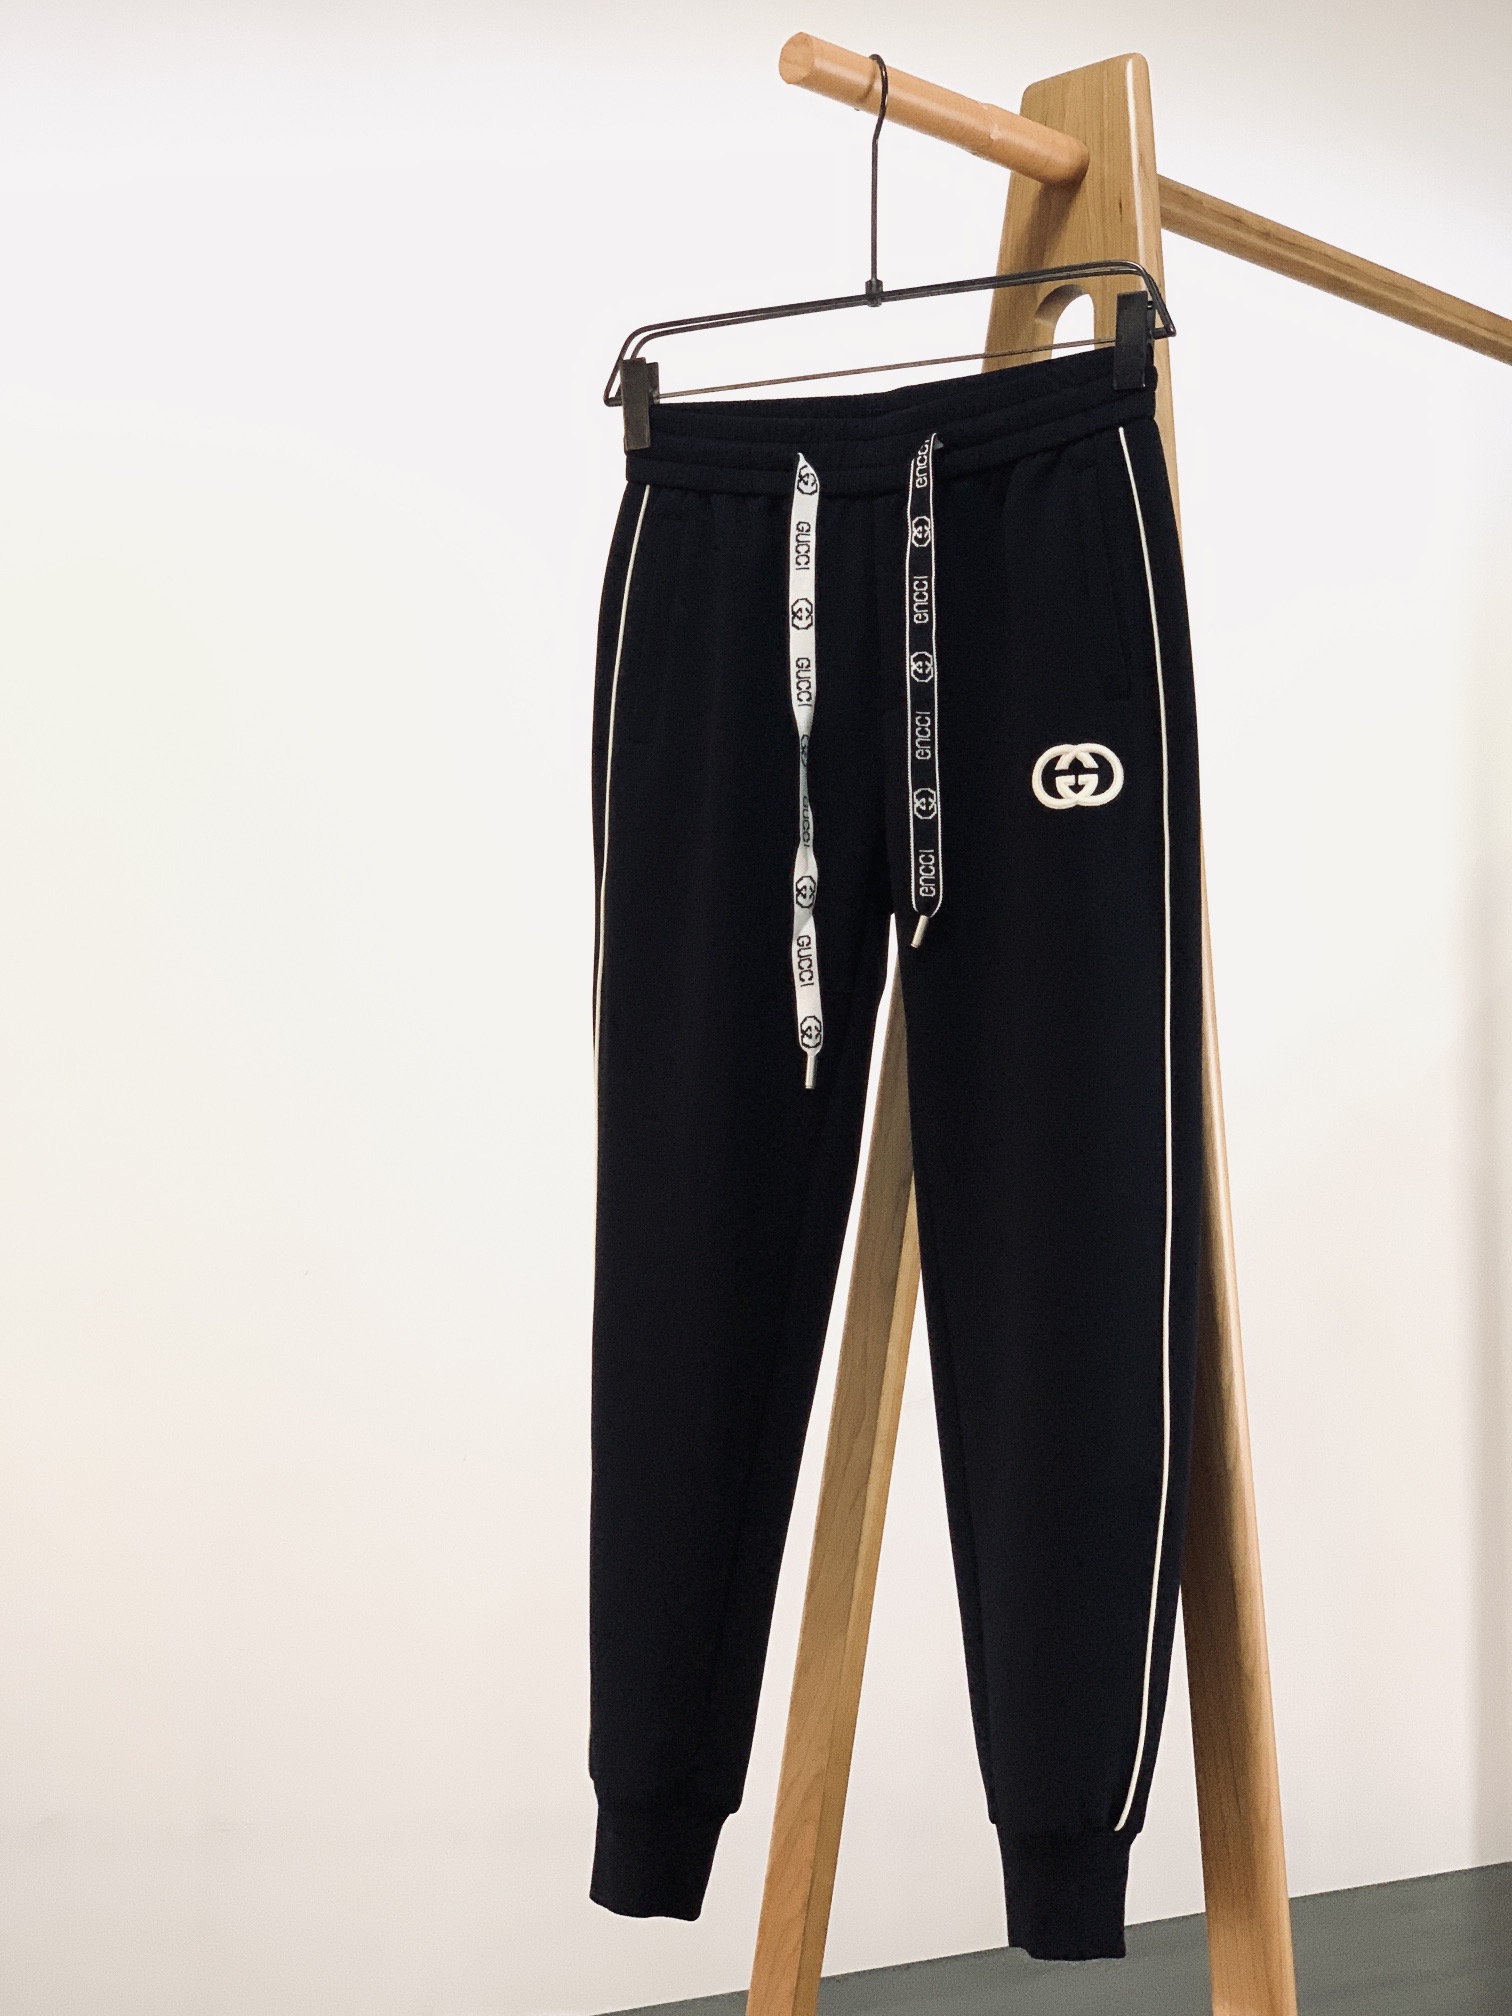 High Quality Designer
 Gucci Clothing Pants & Trousers Spring/Summer Collection Fashion Casual